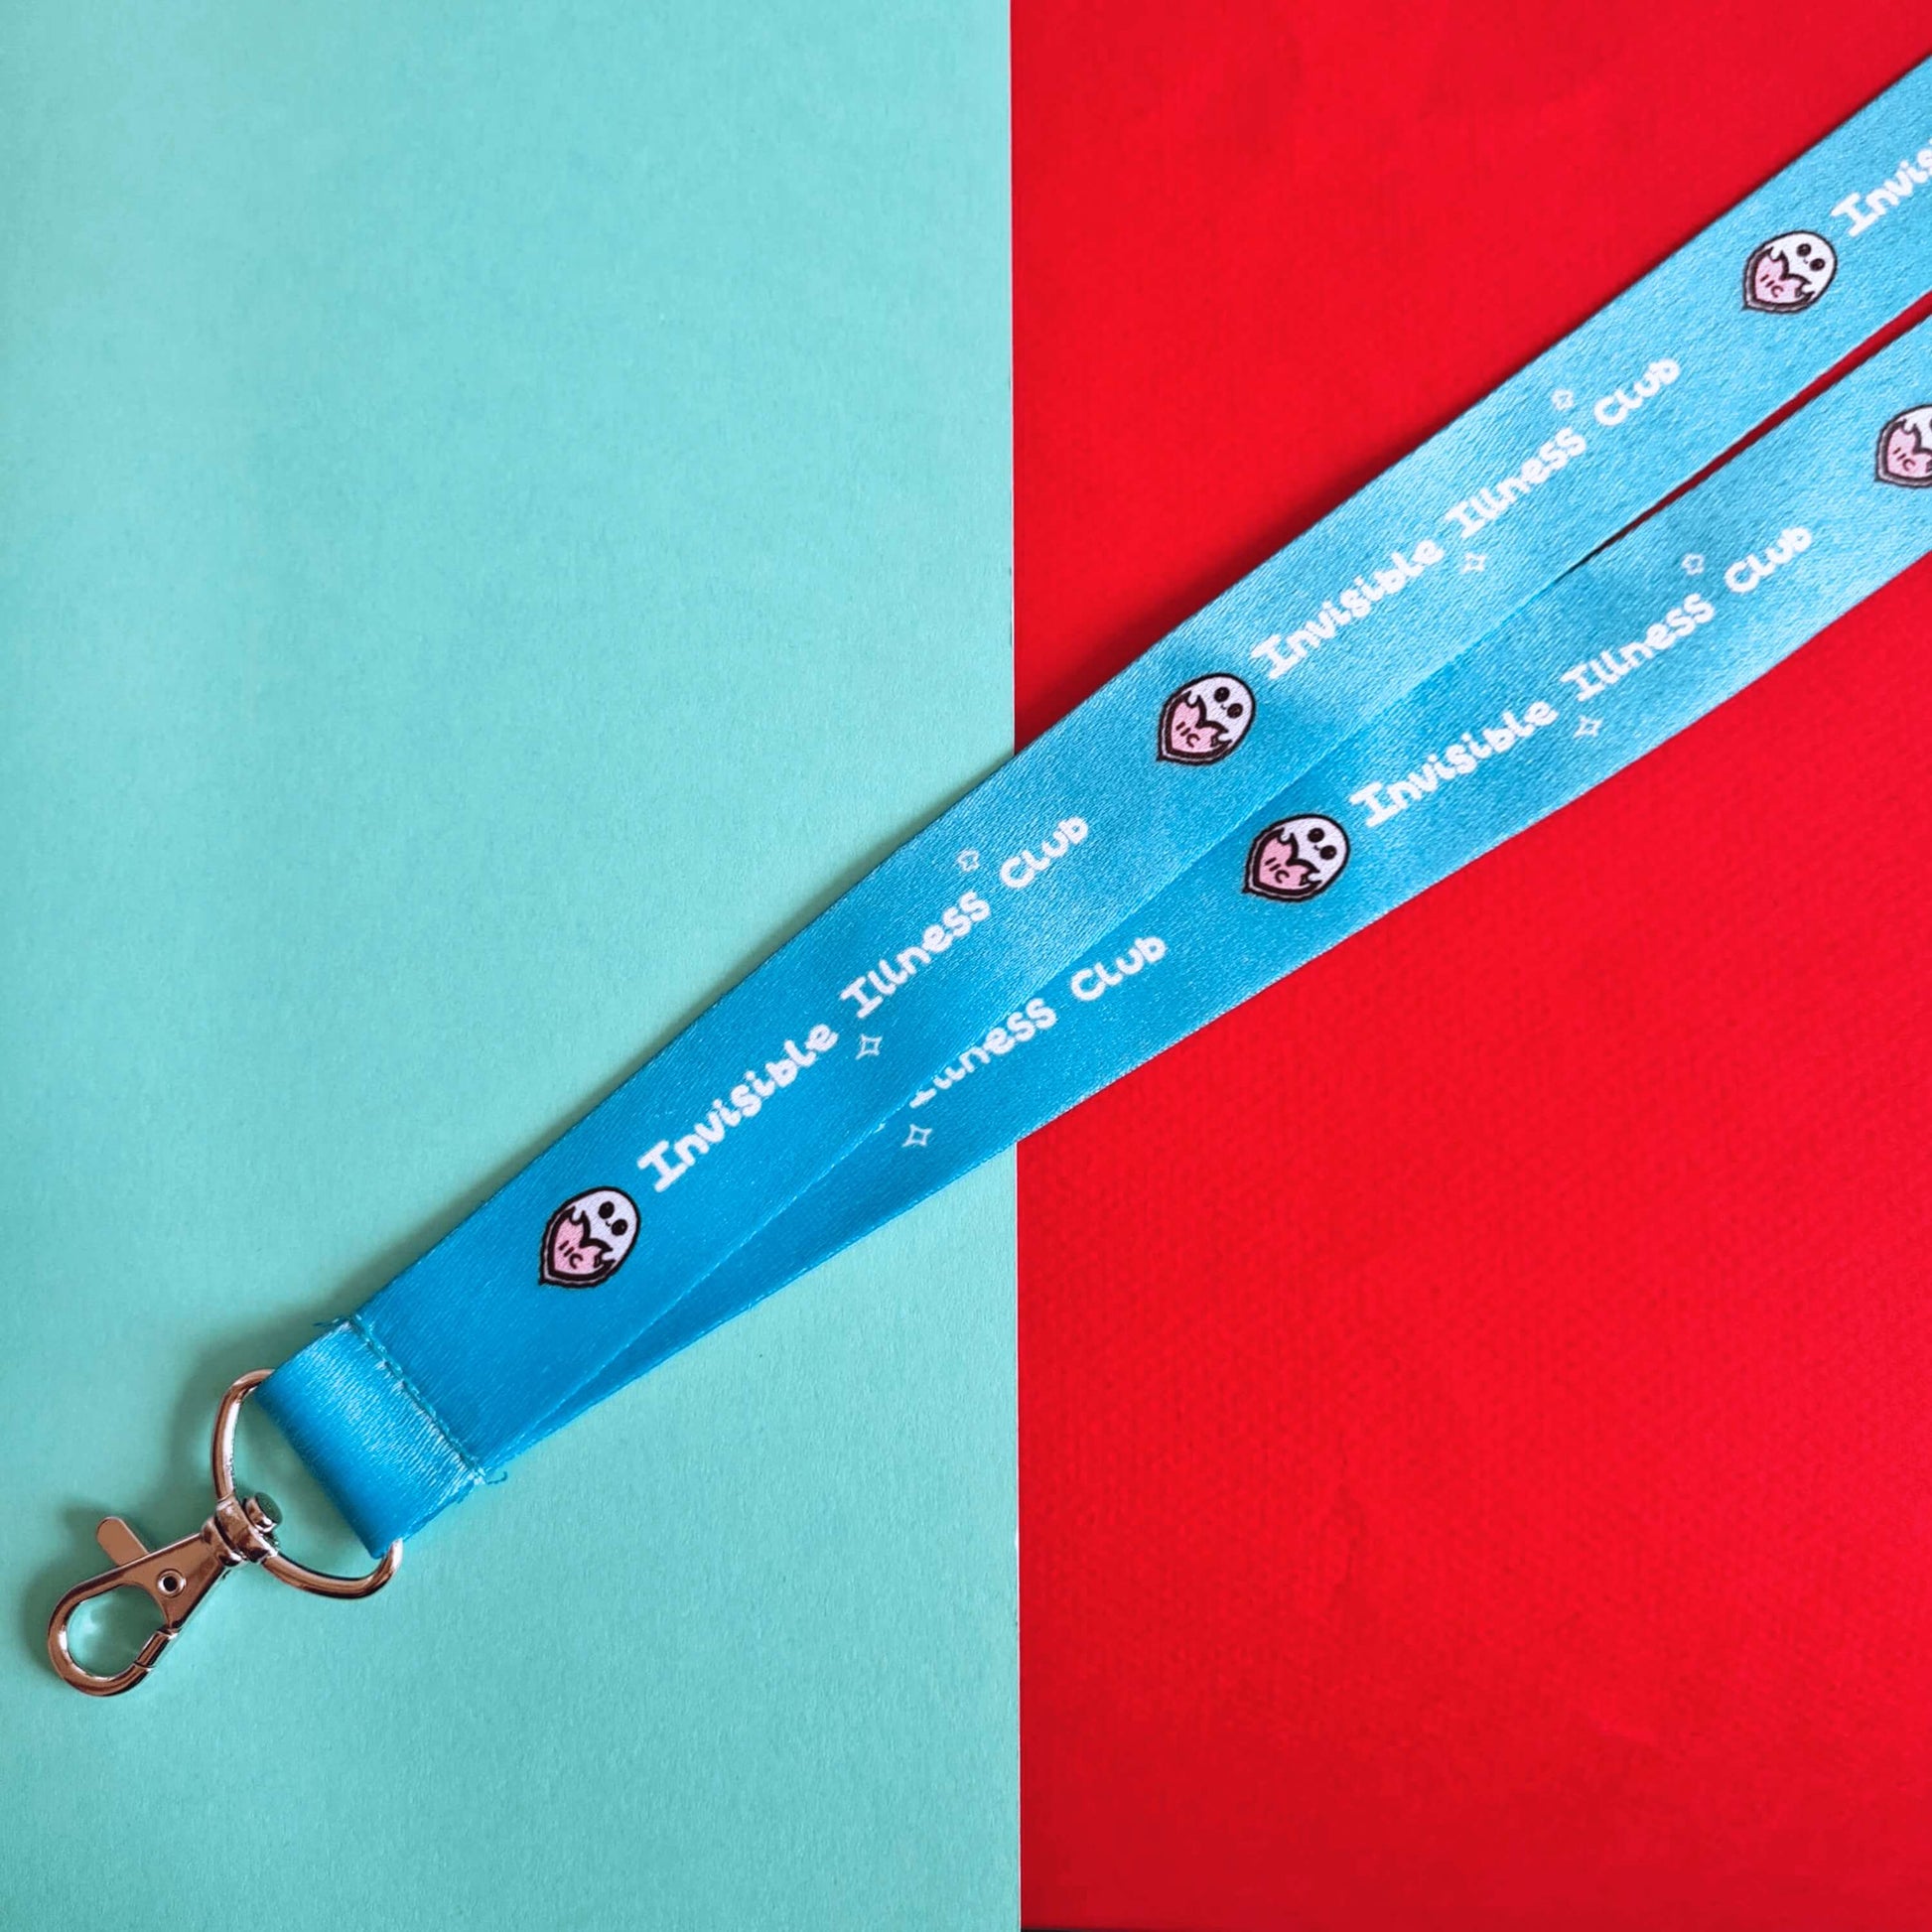 Aqua light blue lanyard with 'Invisible Illness Club' written on it in white with Innabox ghost logo and silver lobster clasp. Shown on a red and blue background. Raising awareness for invisible illnesses.